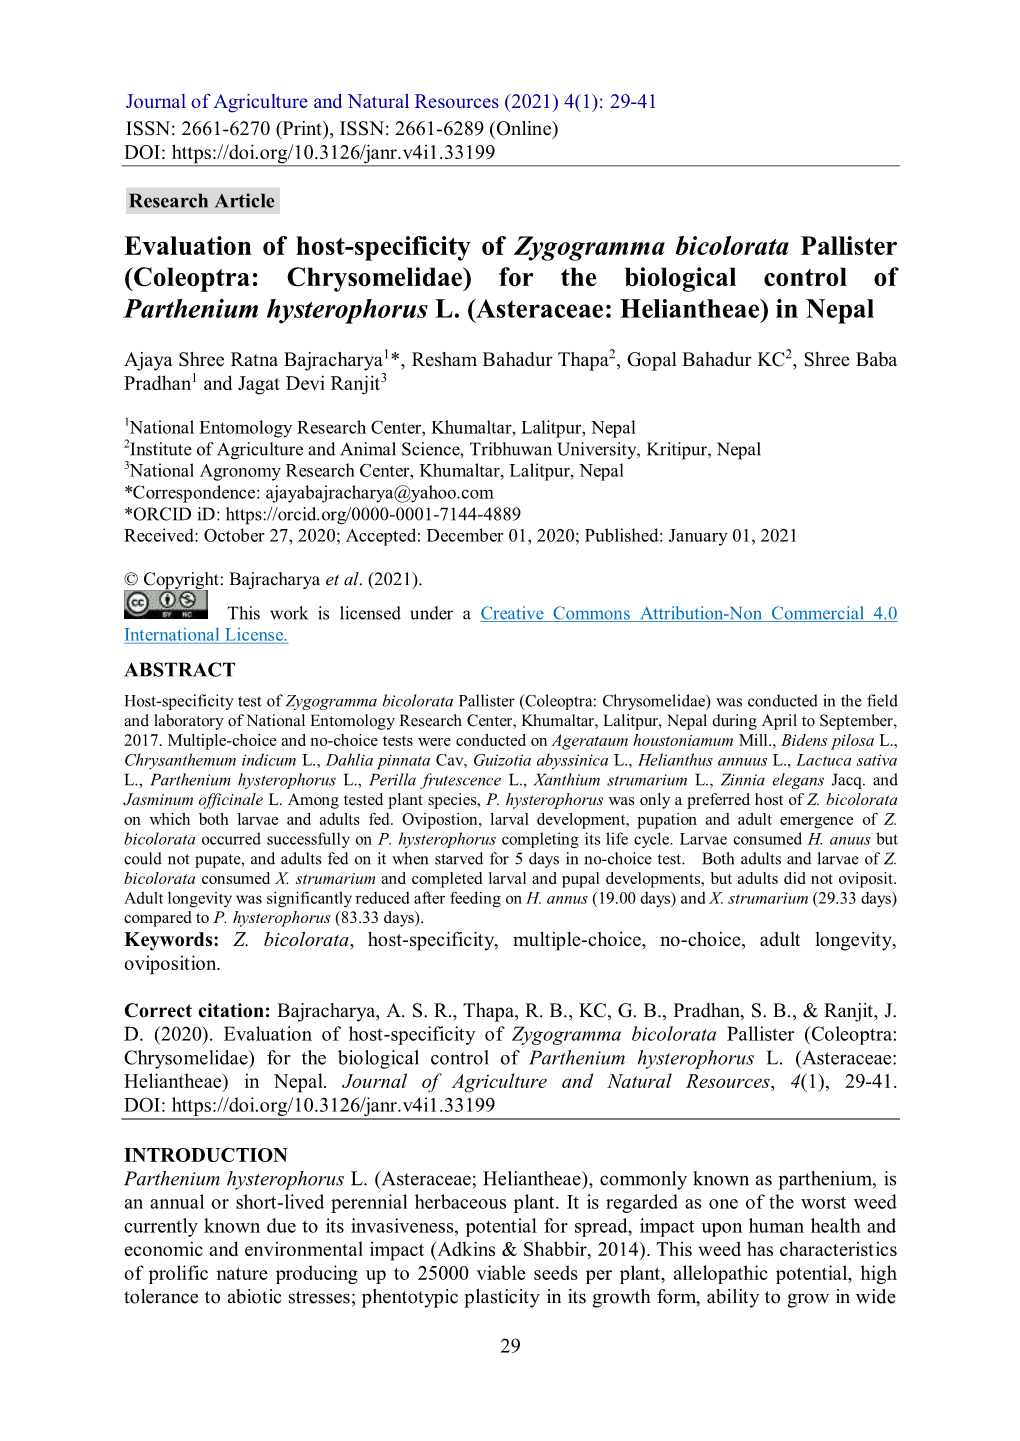 Evaluation of Host-Specificity of Zygogramma Bicolorata Pallister (Coleoptra: Chrysomelidae) for the Biological Control of Parthenium Hysterophorus L